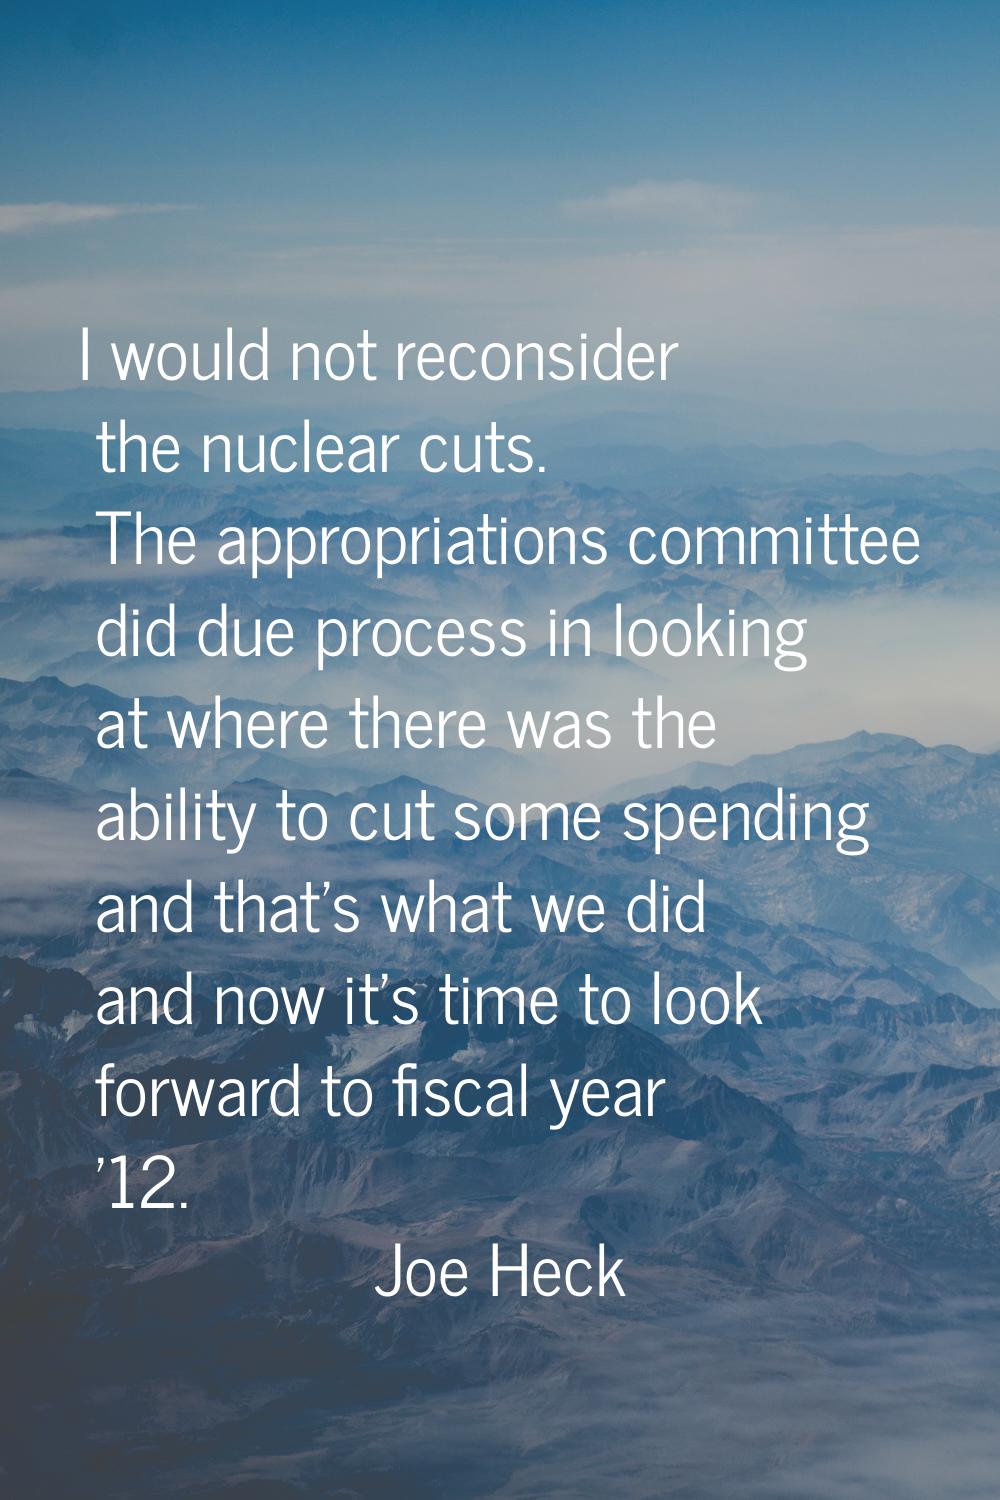 I would not reconsider the nuclear cuts. The appropriations committee did due process in looking at